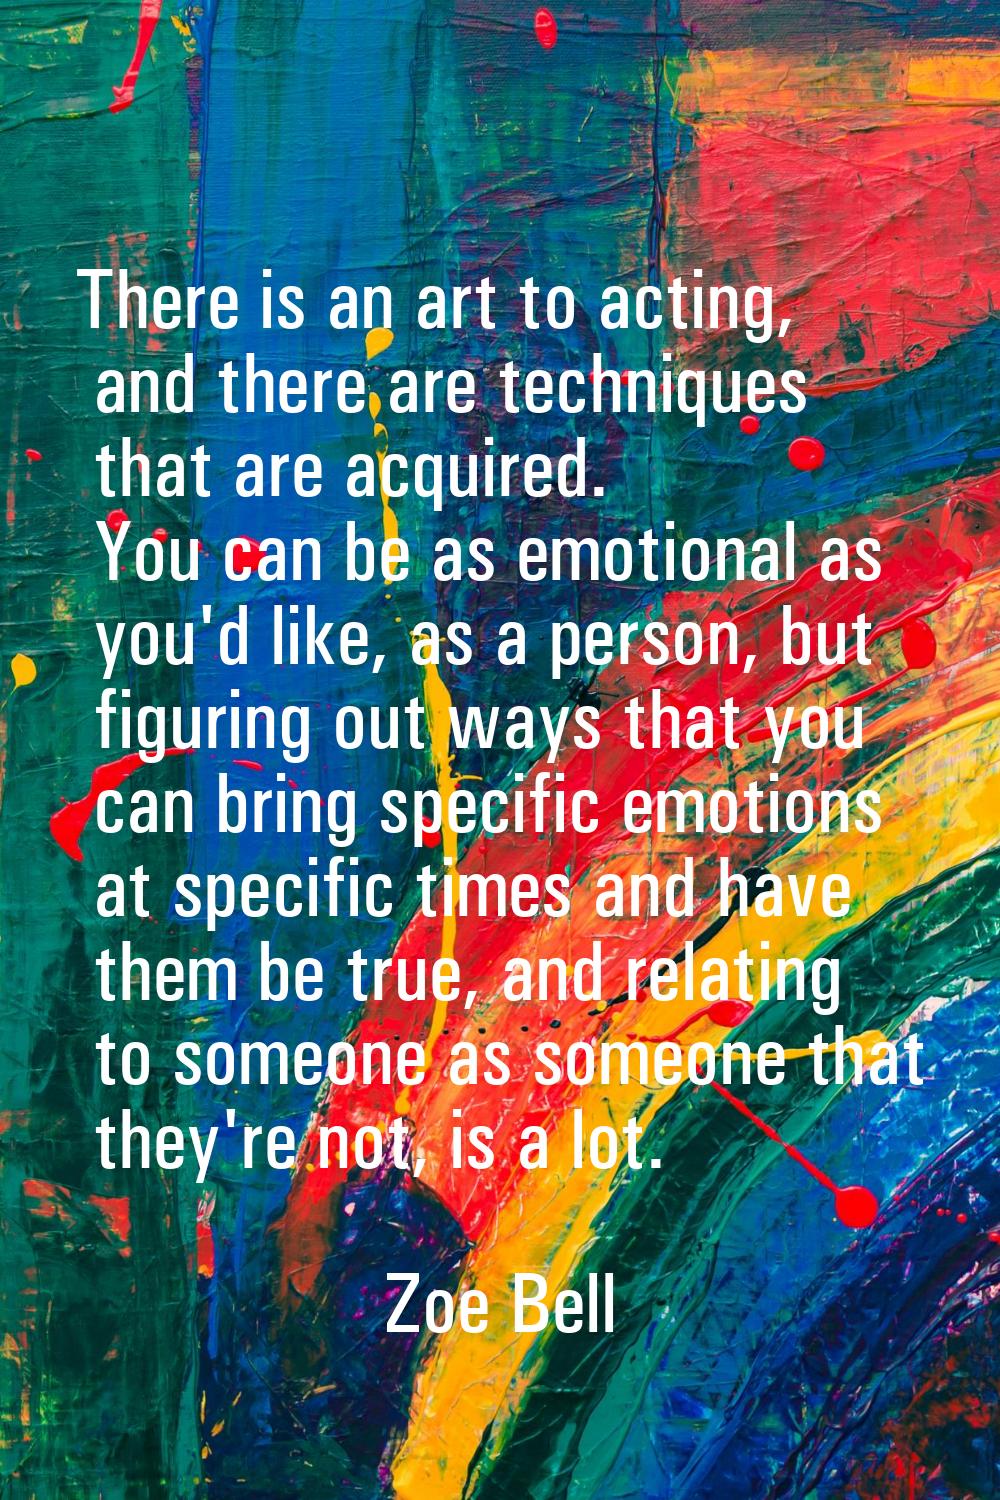 There is an art to acting, and there are techniques that are acquired. You can be as emotional as y